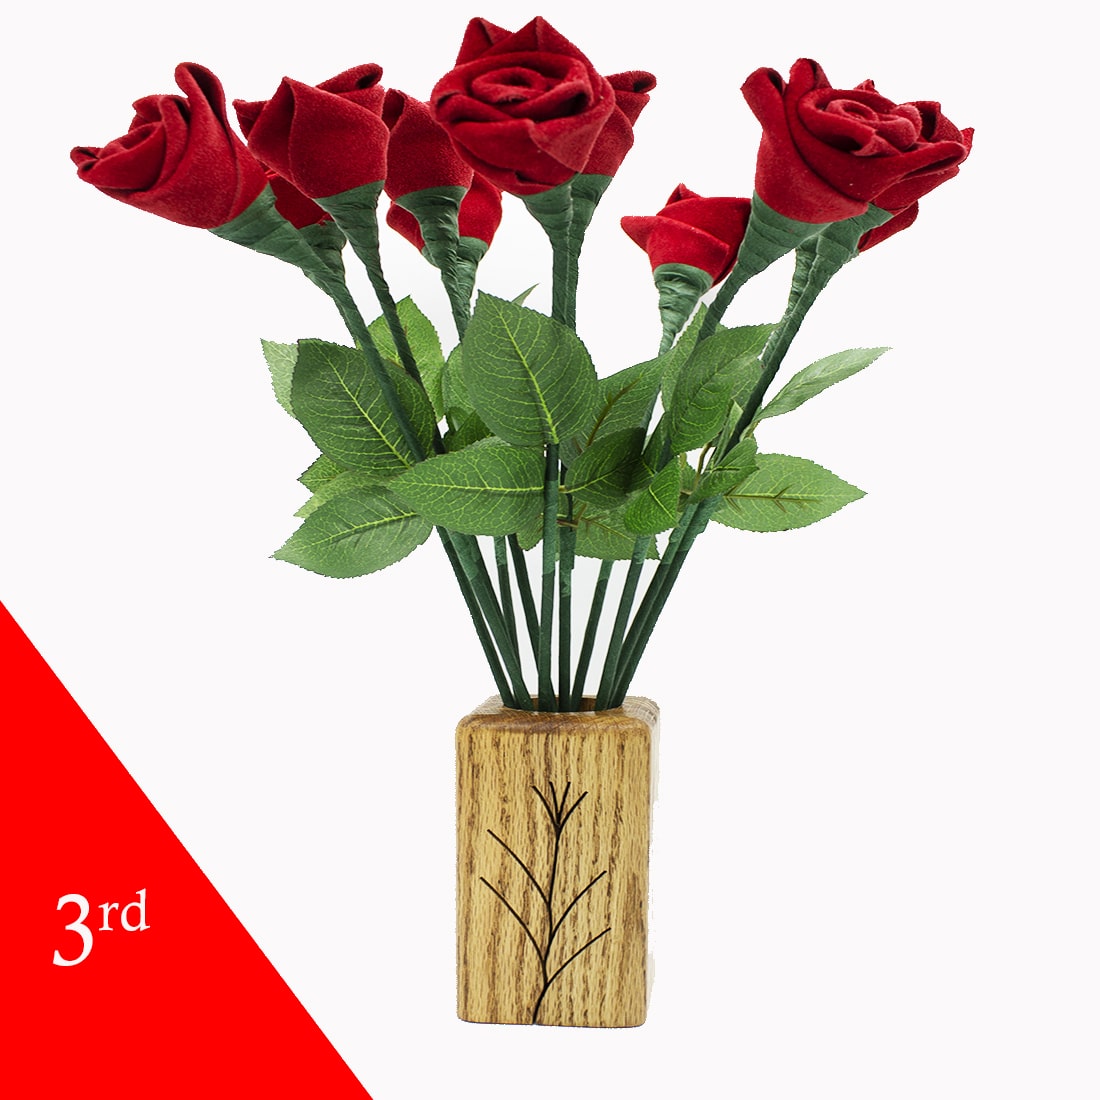 1st First Wedding lifelike paper roses 12-Stem Bouquet and Wood Vase JustPaperRoses AX-AY-ABHI-61795